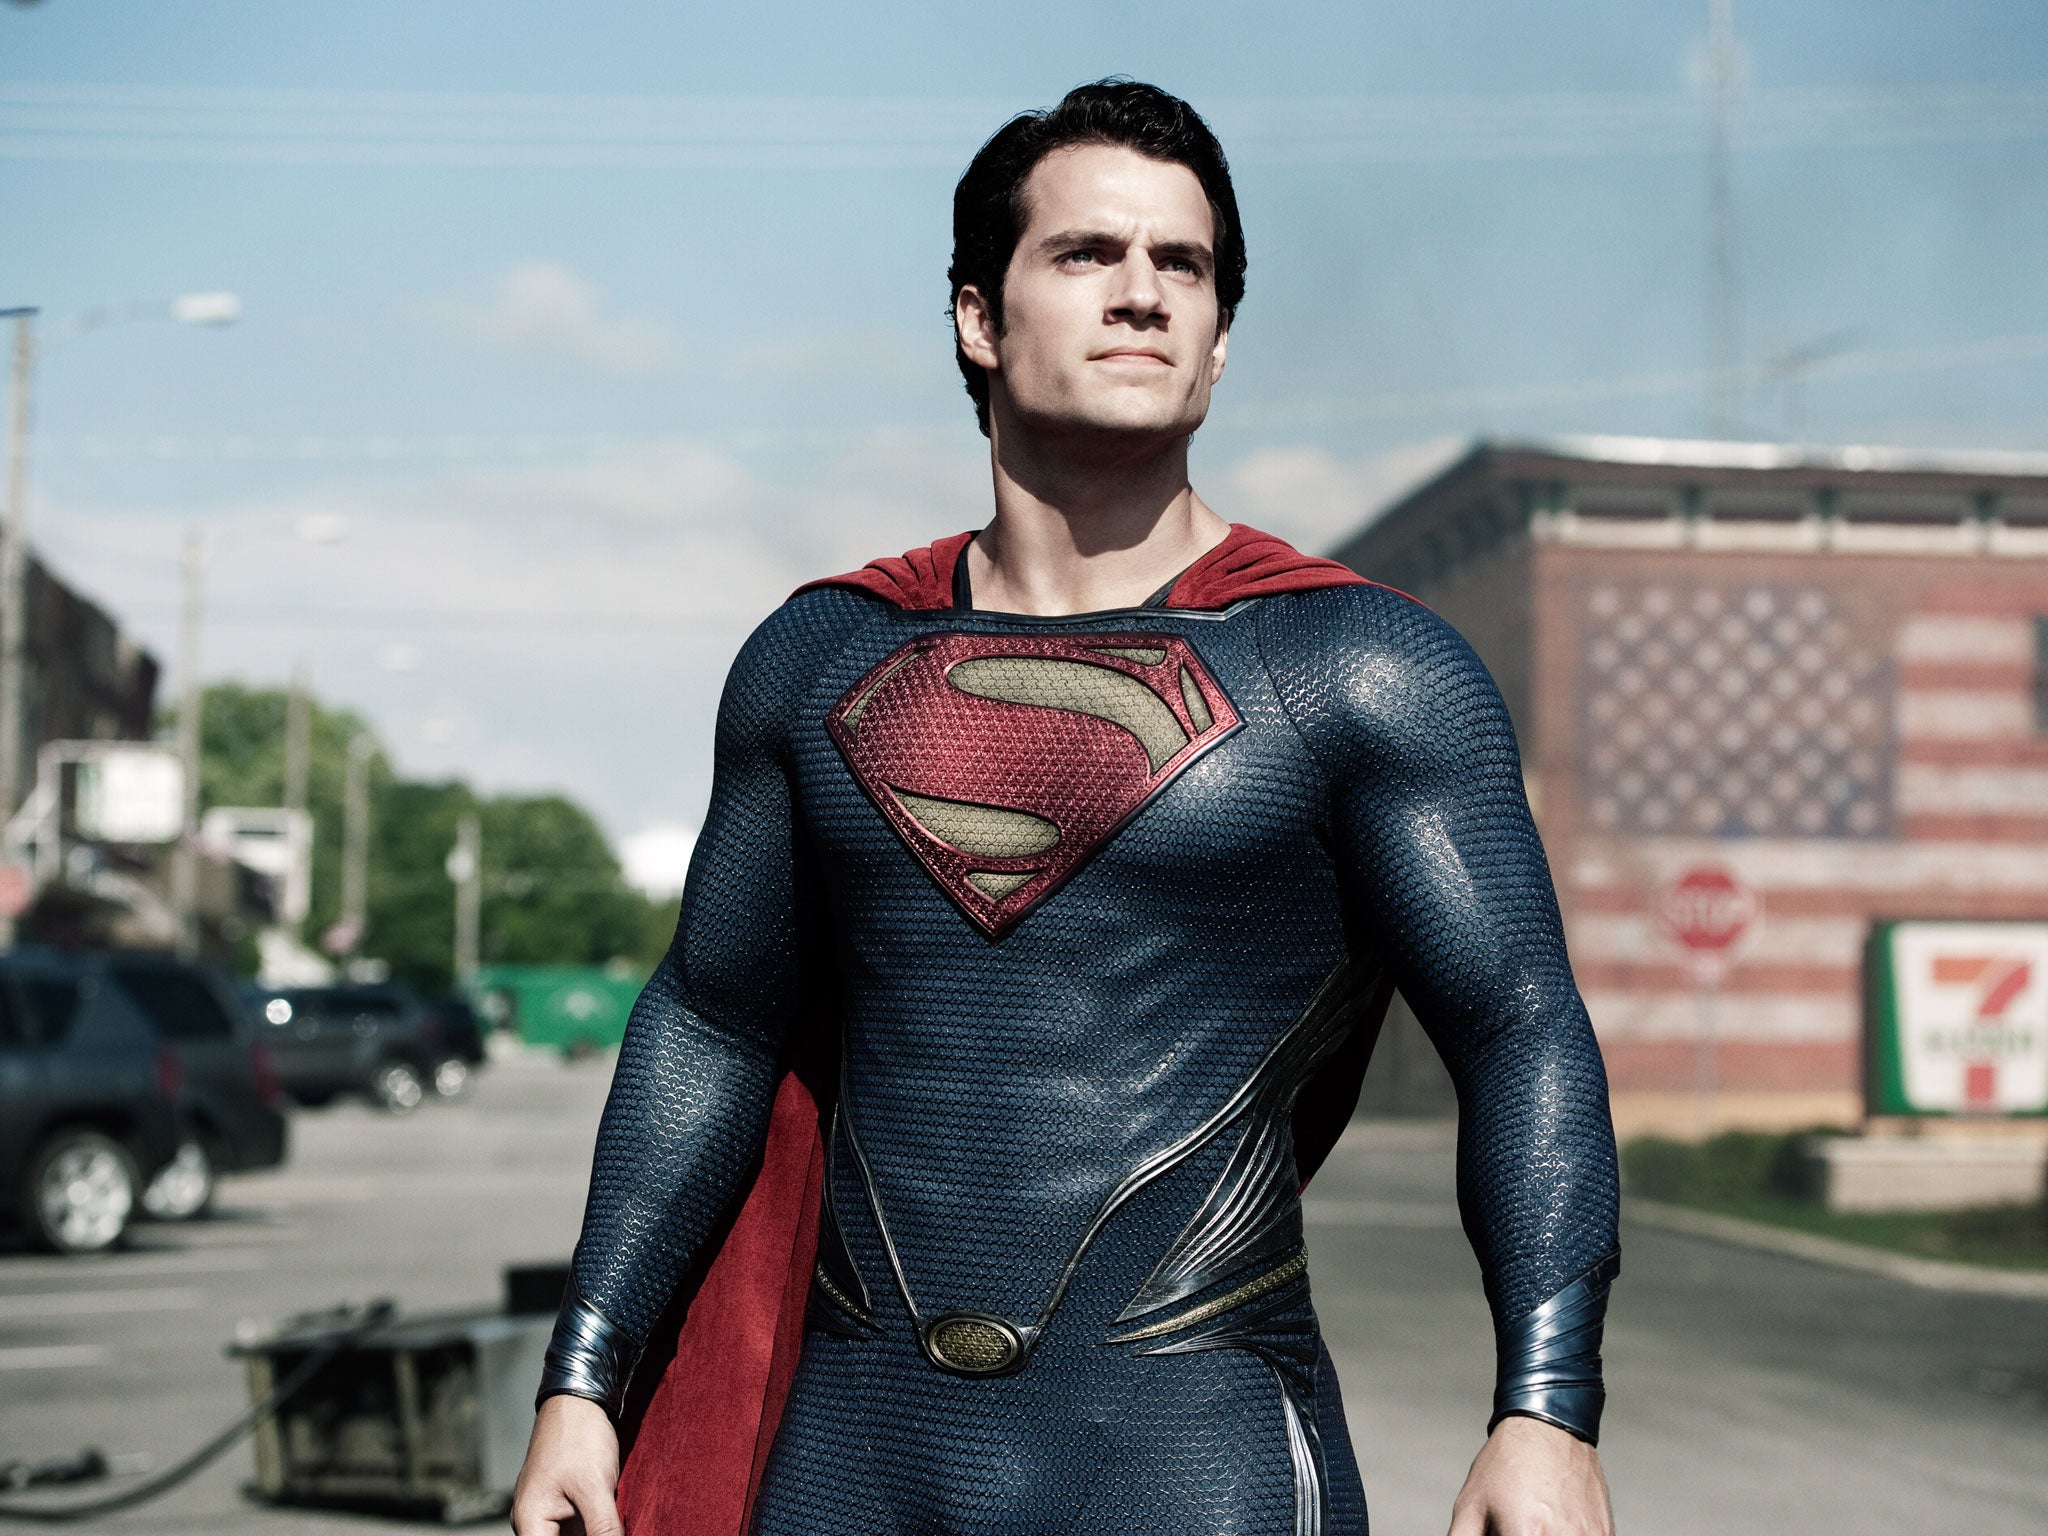 Krypton factor: Henry Cavill is the latest Brit actor to nab a big American superhero role